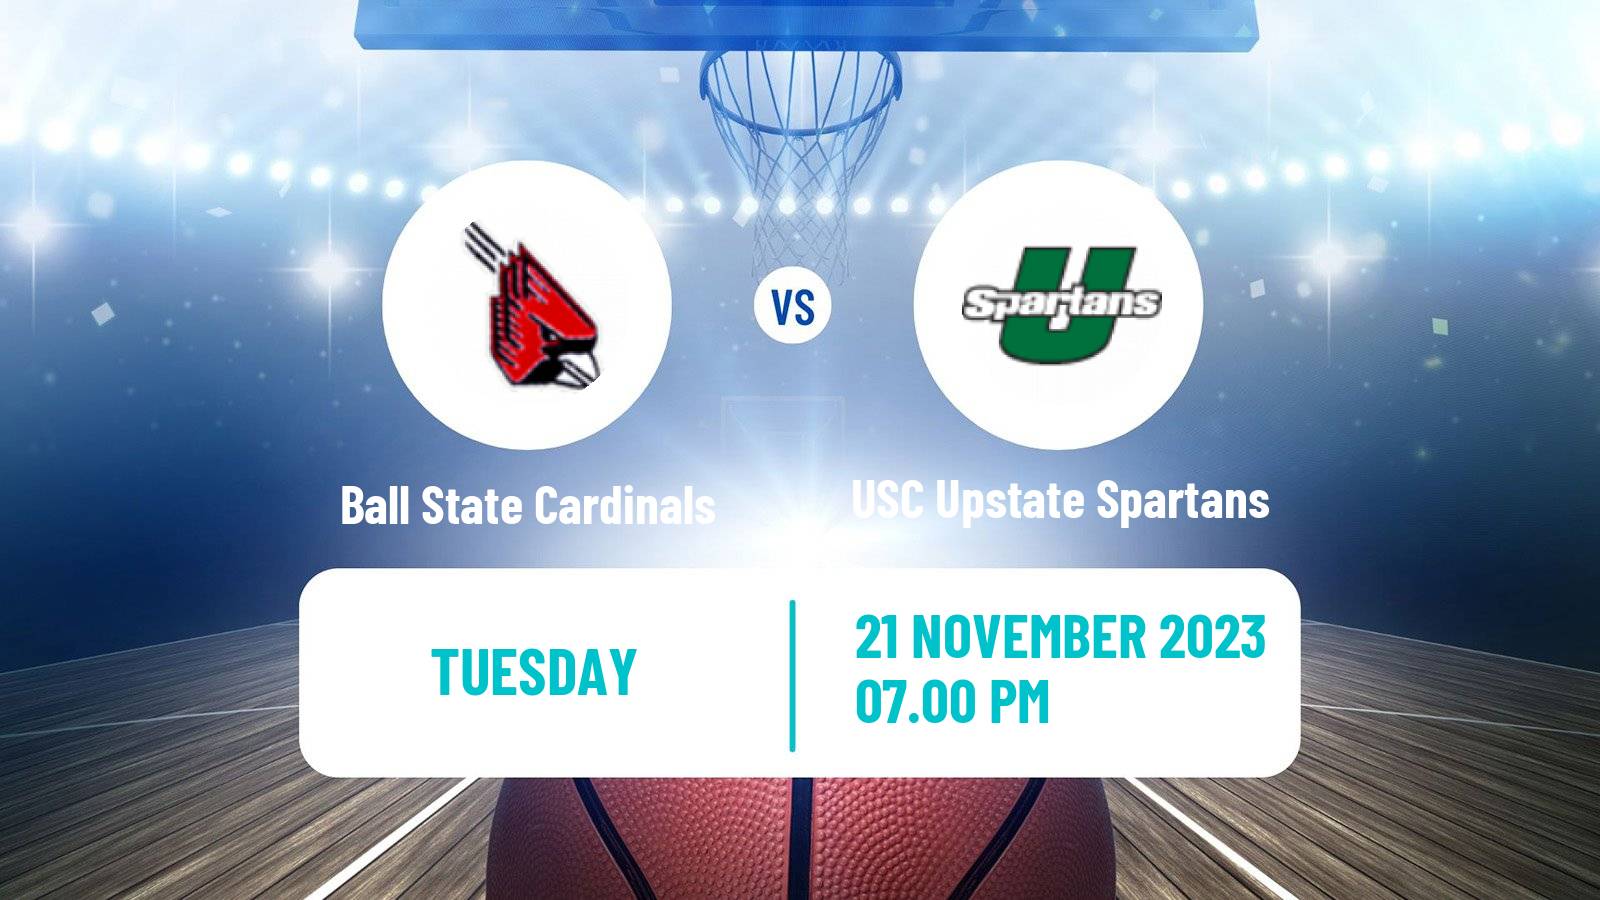 Basketball NCAA College Basketball Ball State Cardinals - USC Upstate Spartans